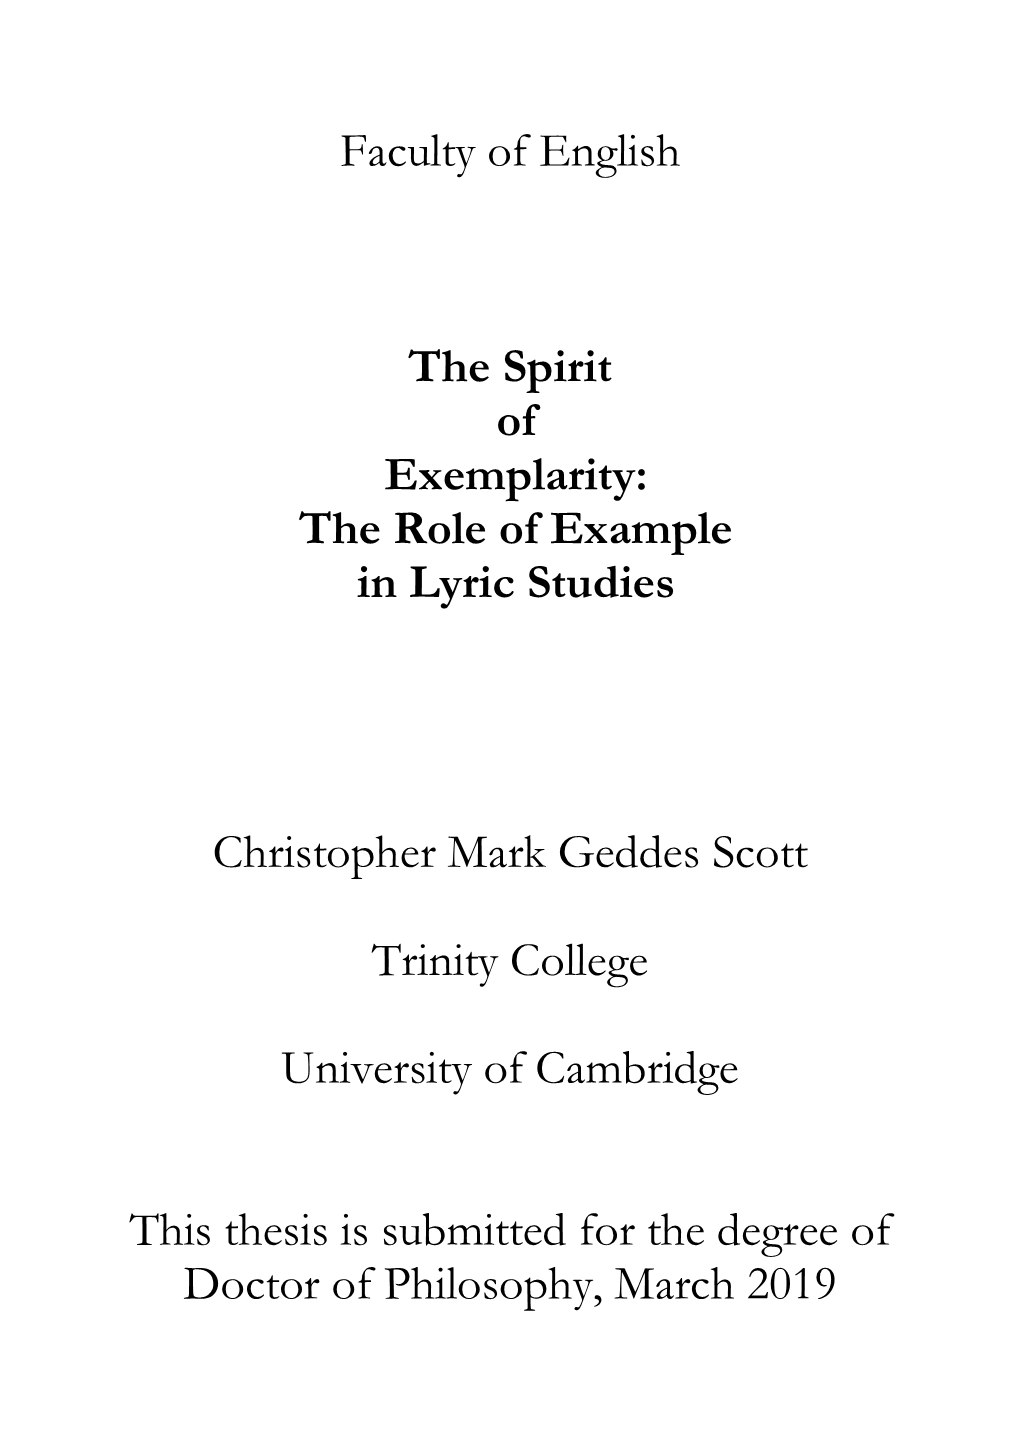 Faculty of English the Spirit of Exemplarity